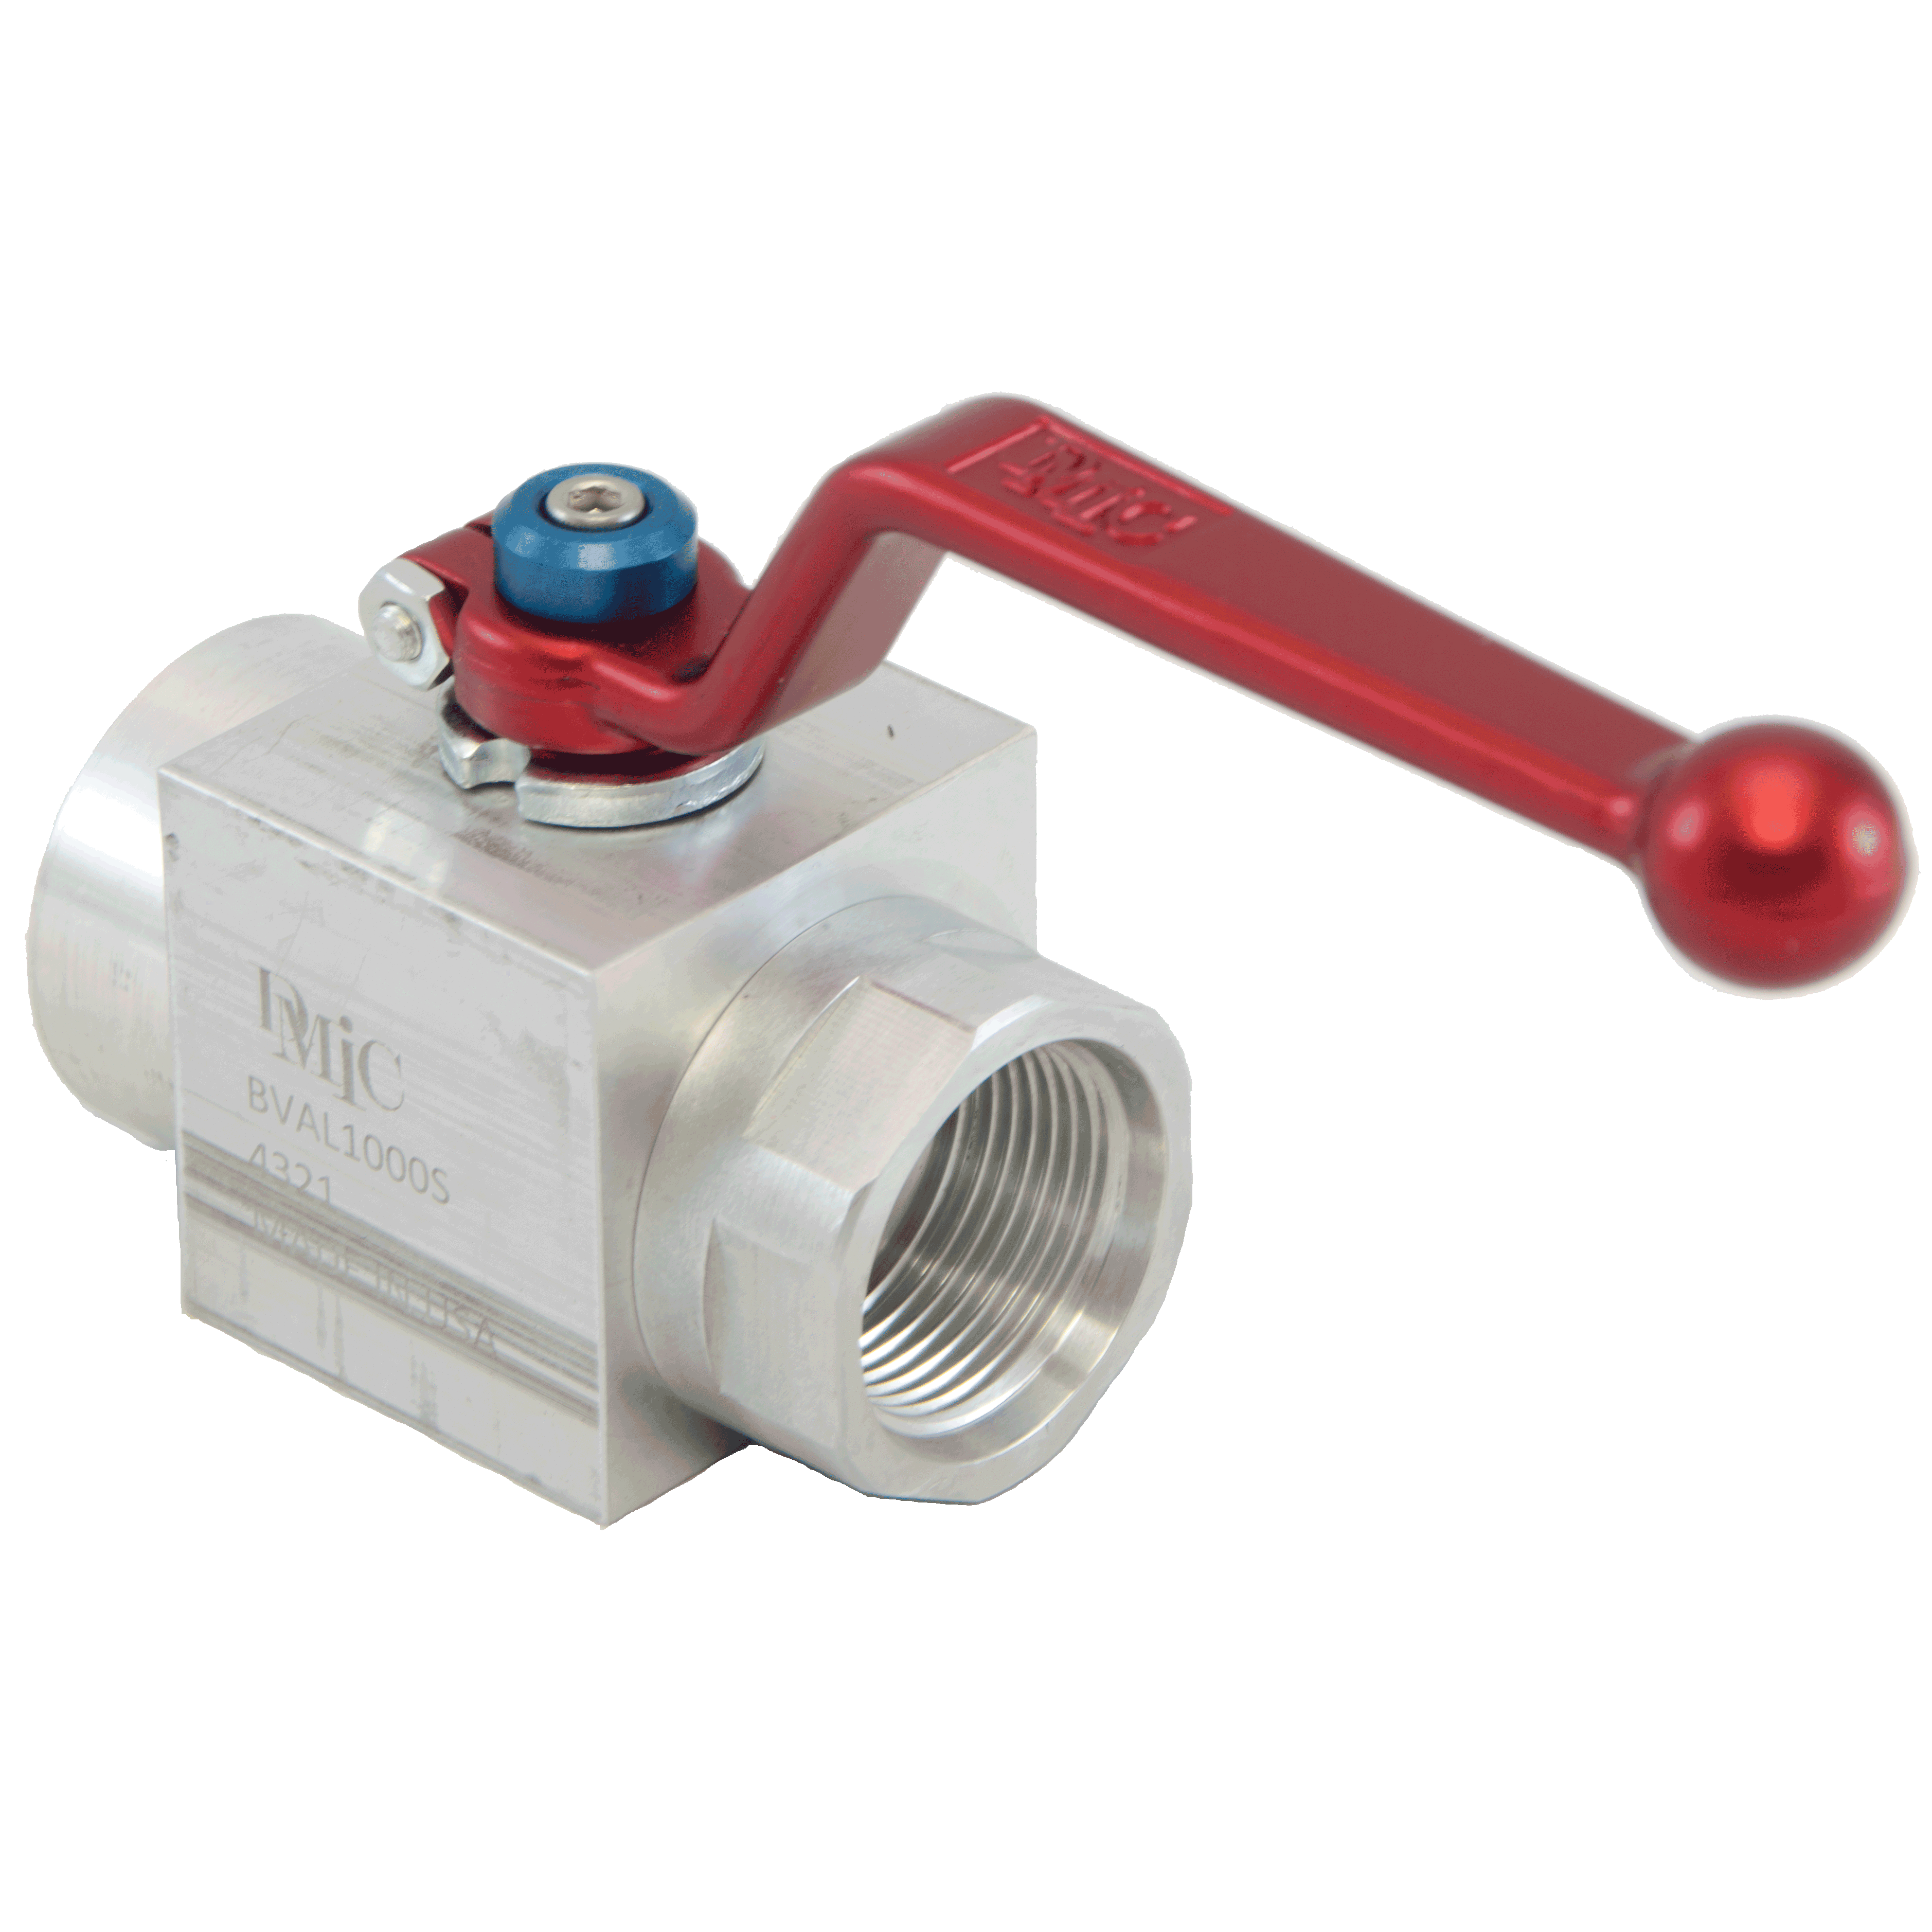 BVAL-0750N-4321-AZZN : DMIC Suction Ball Valve, 3/4 NPT, Aluminum, 600psi, Two-Way, with Locking Handle